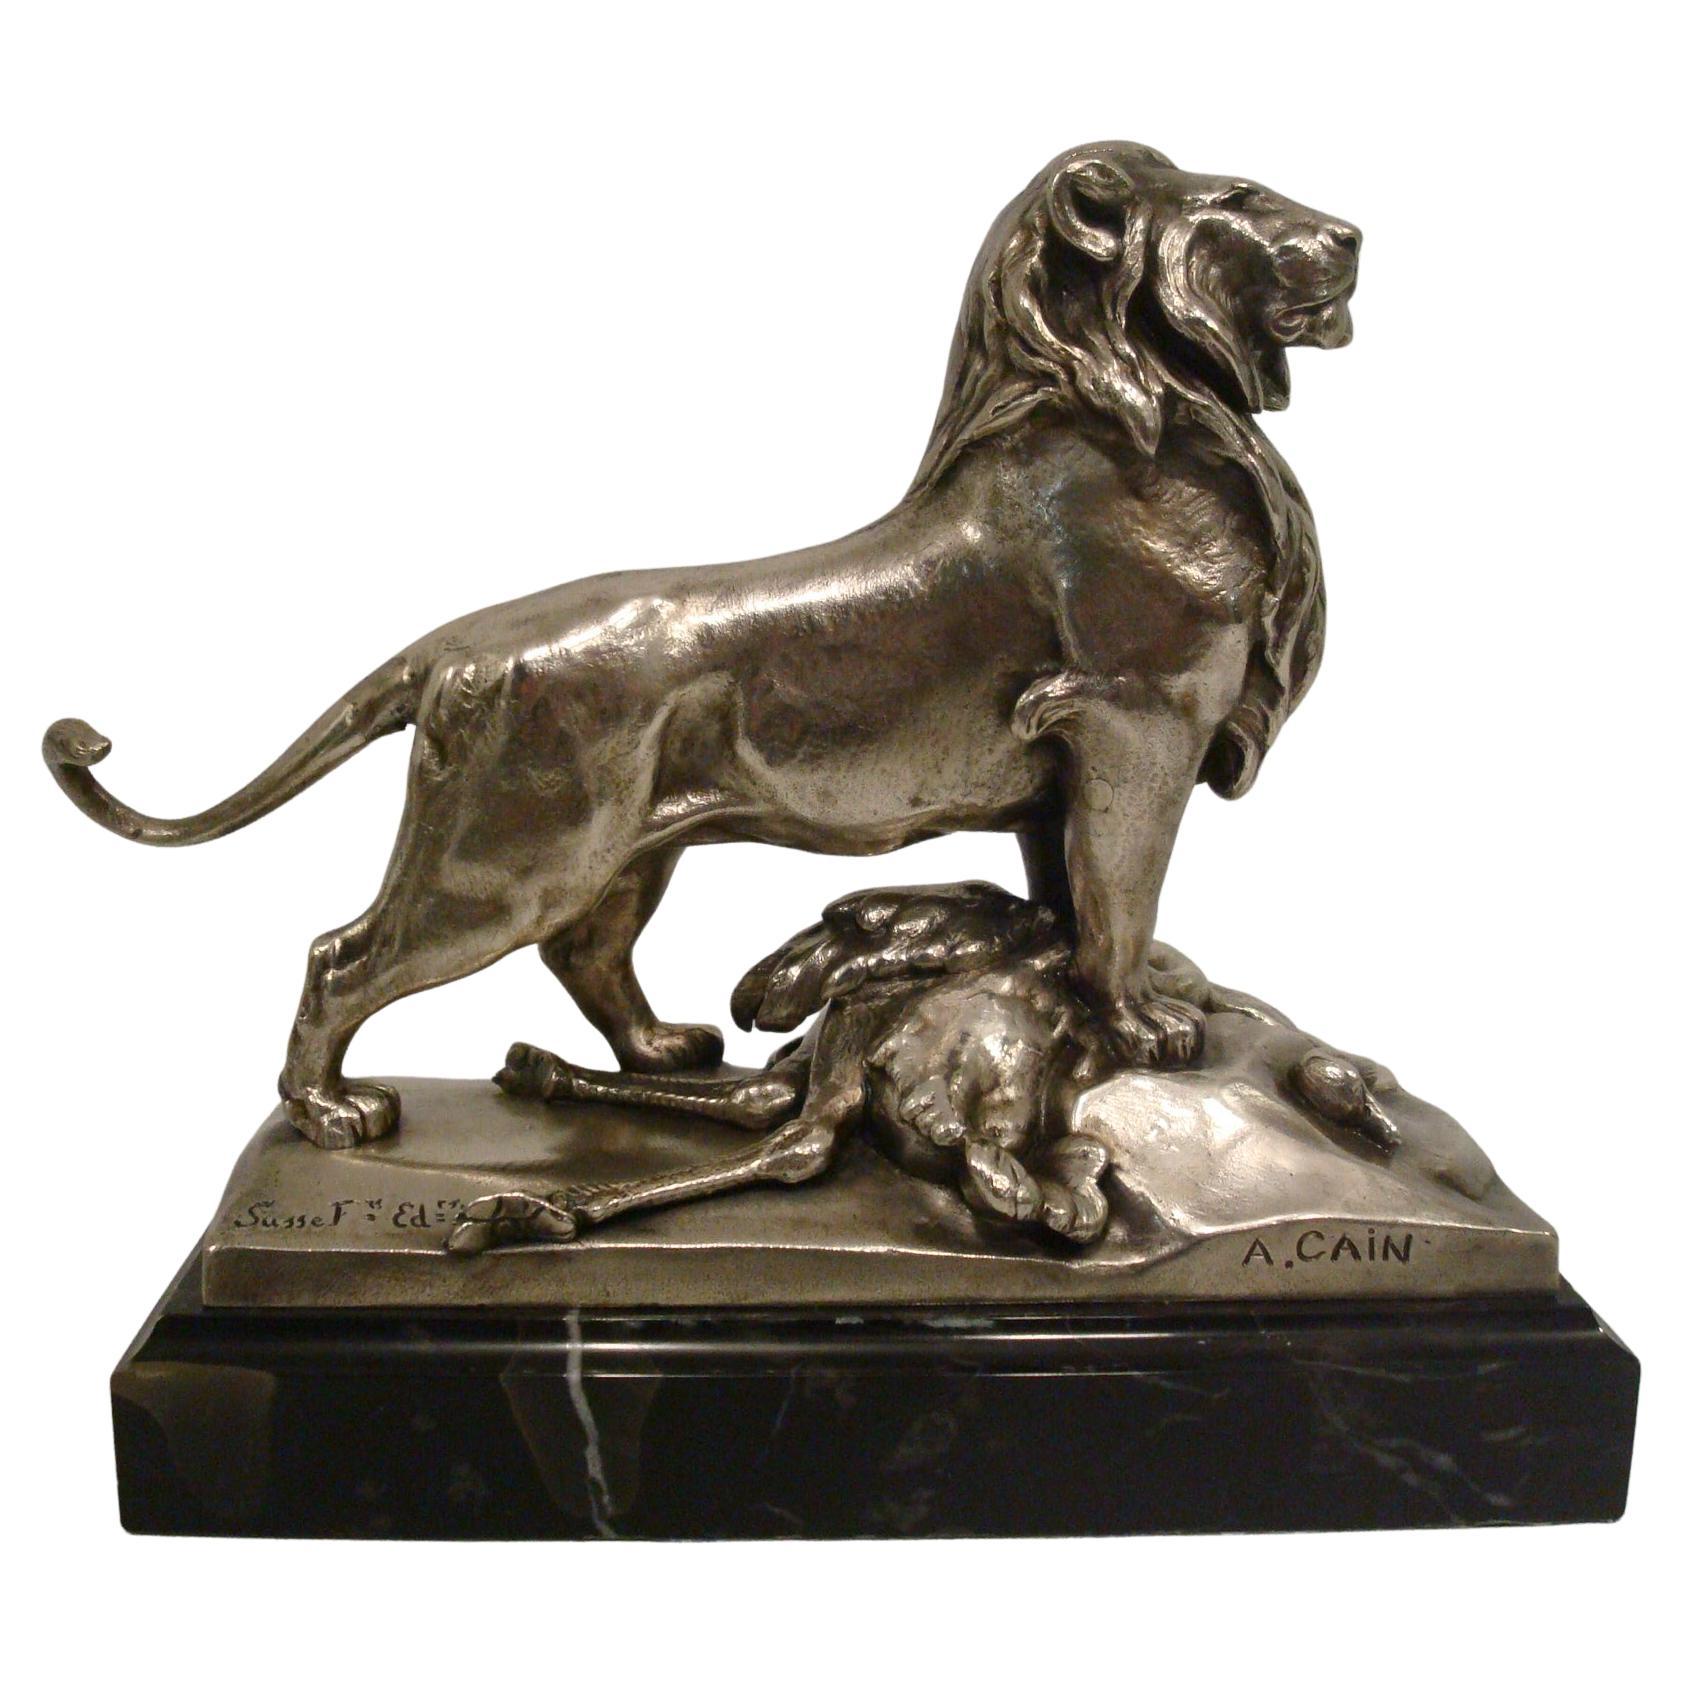 Auguste Cain Silvered Bronze Lion & Ostrich Sculpture 19th Century. For Sale